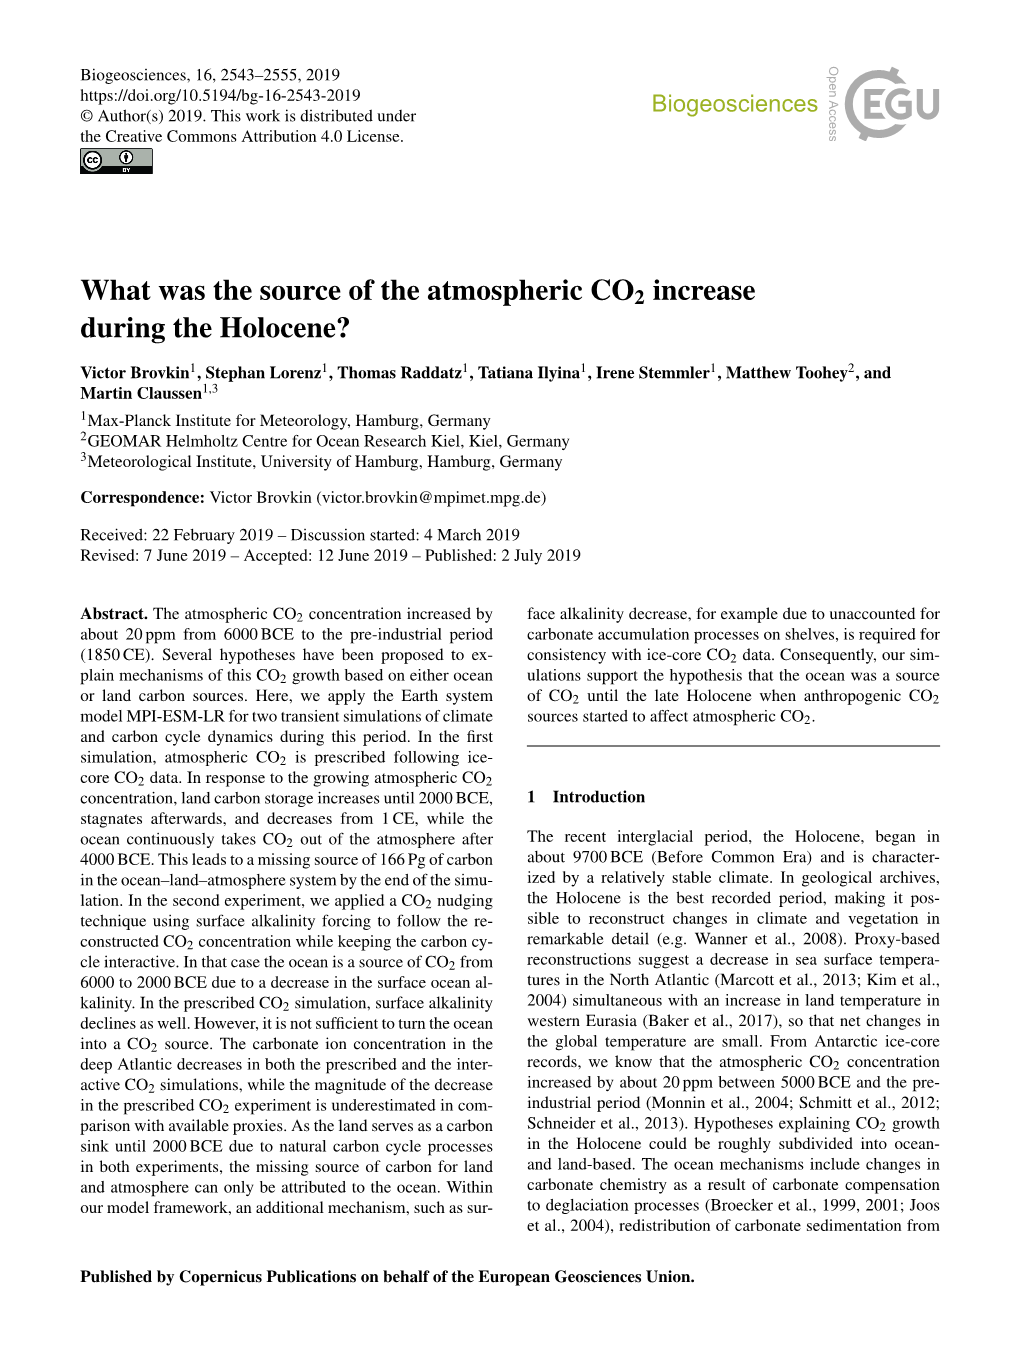 What Was the Source of the Atmospheric CO2 Increase During the Holocene?